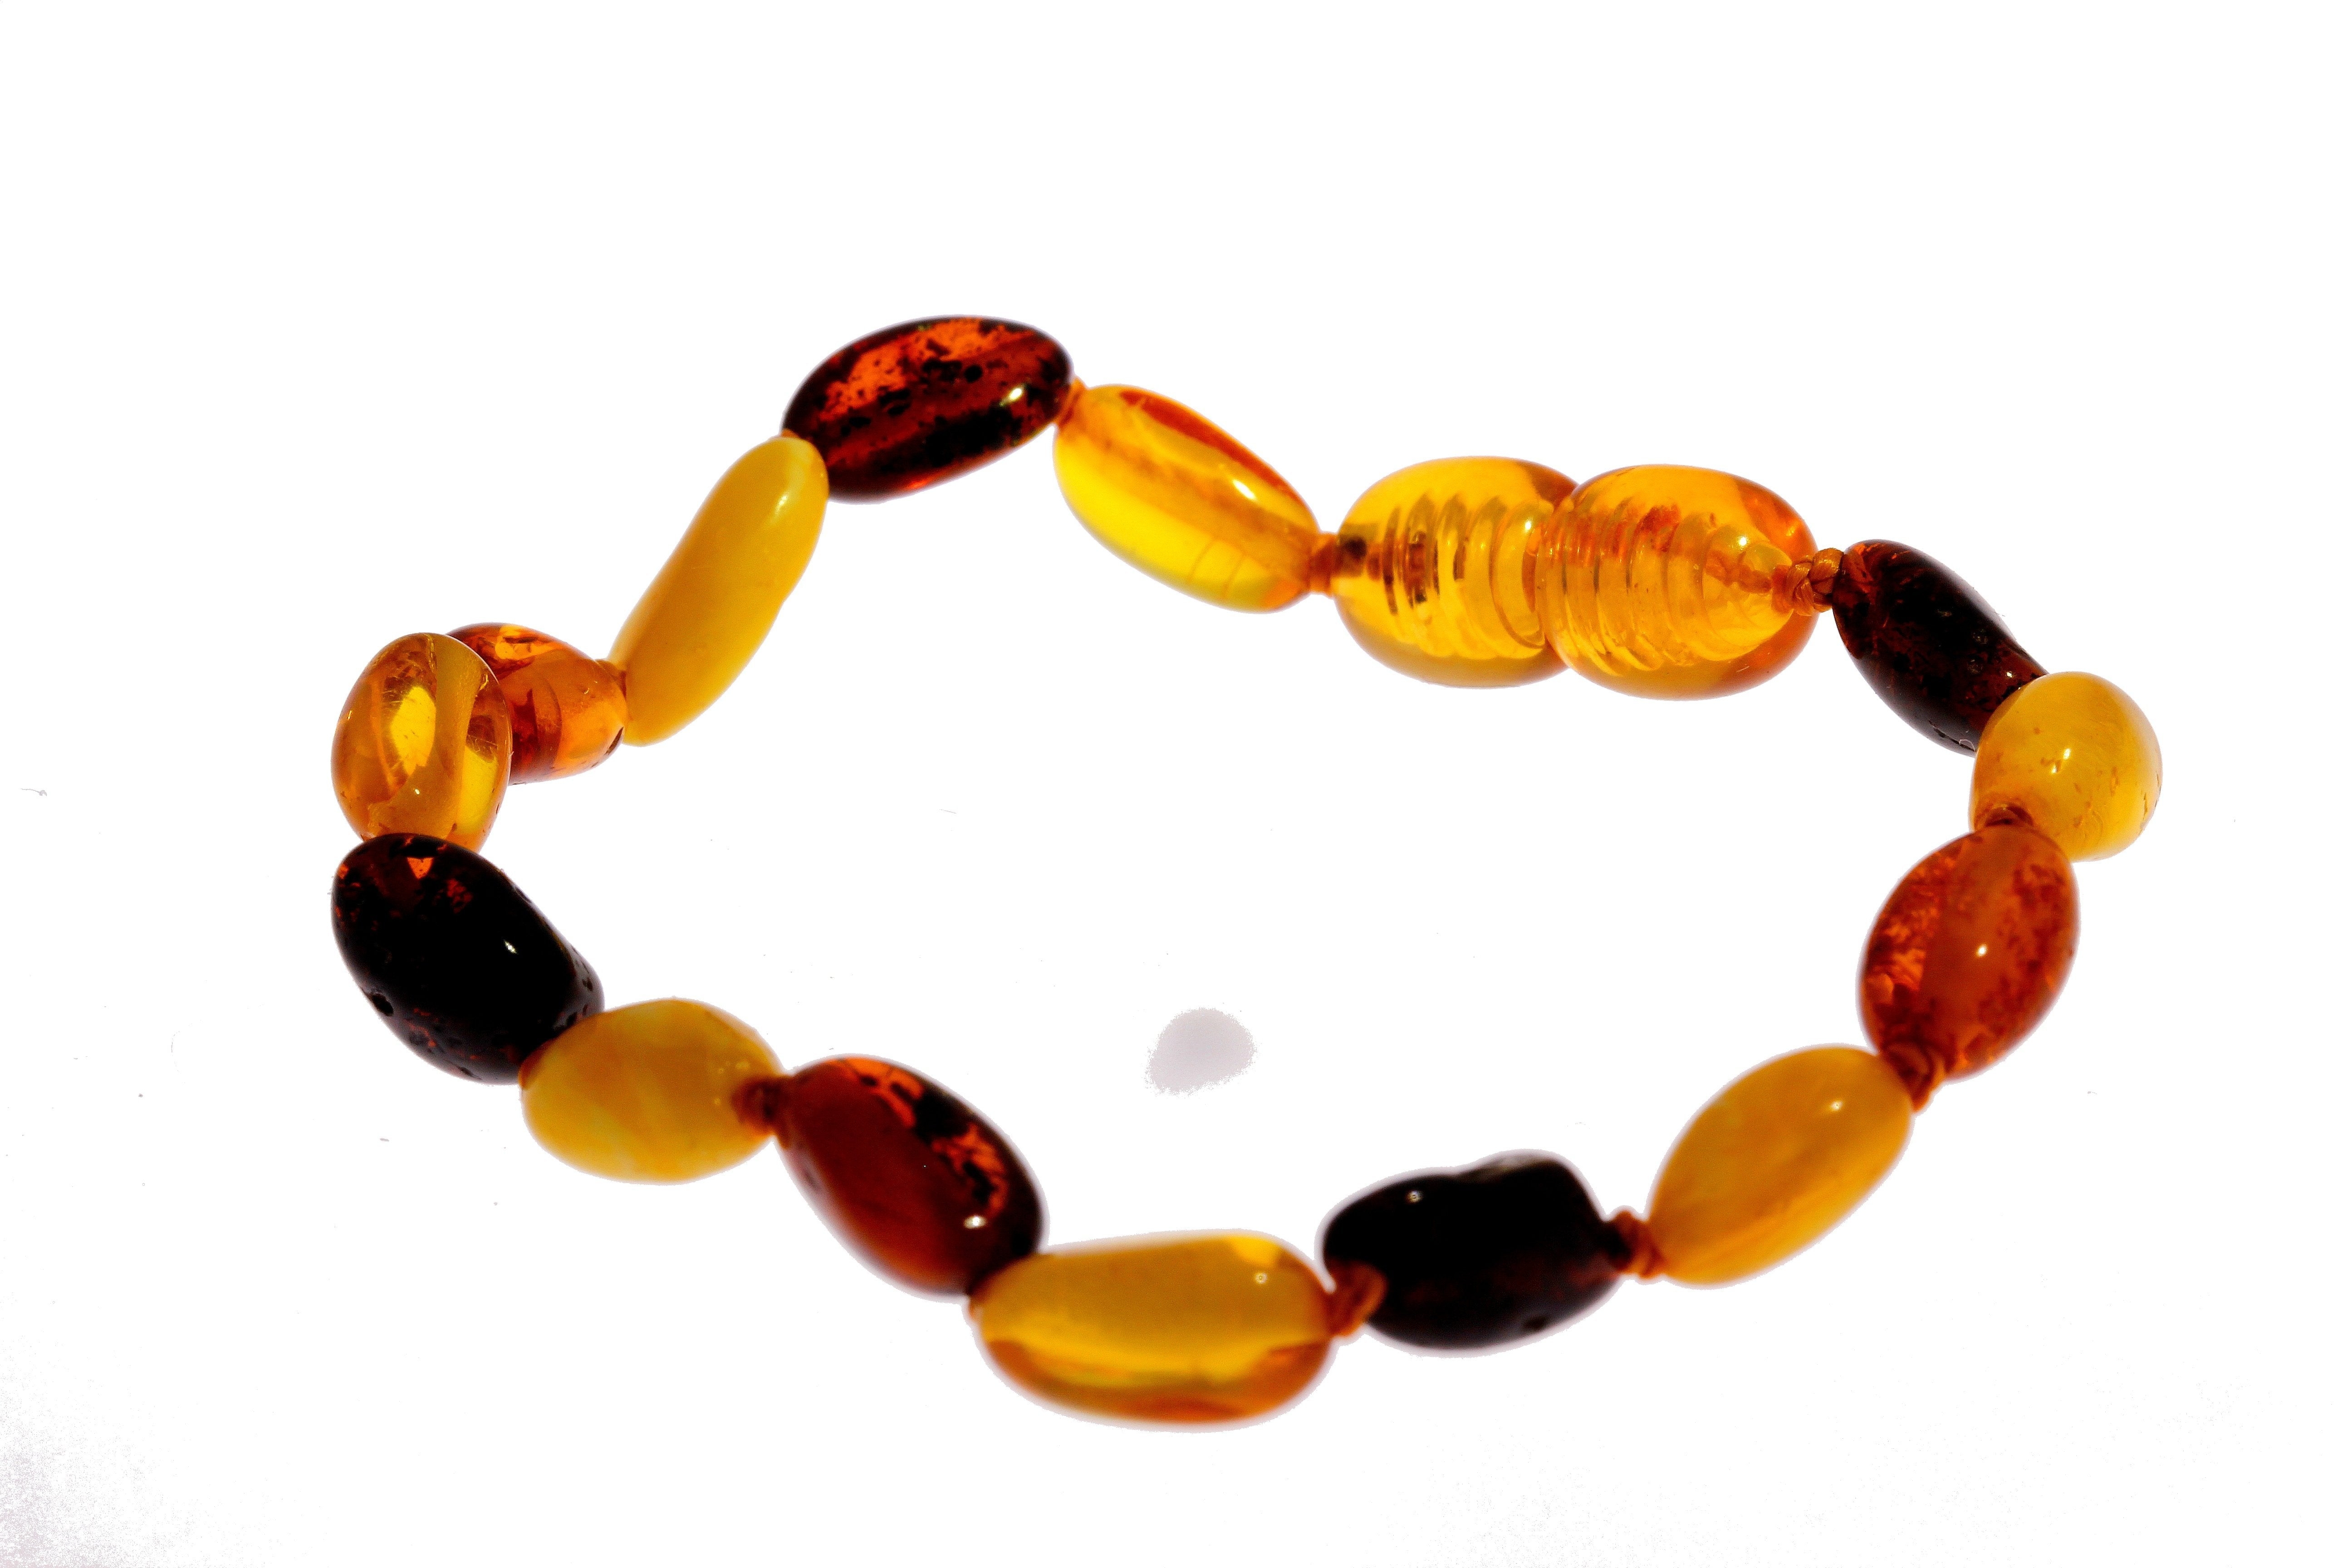 Certified Baltic Amber Beans Beads Bracelet in Mixed Colours – Sizes Baby to Adult 12cm – Caroline’s Collection – SilverAmberJewellery